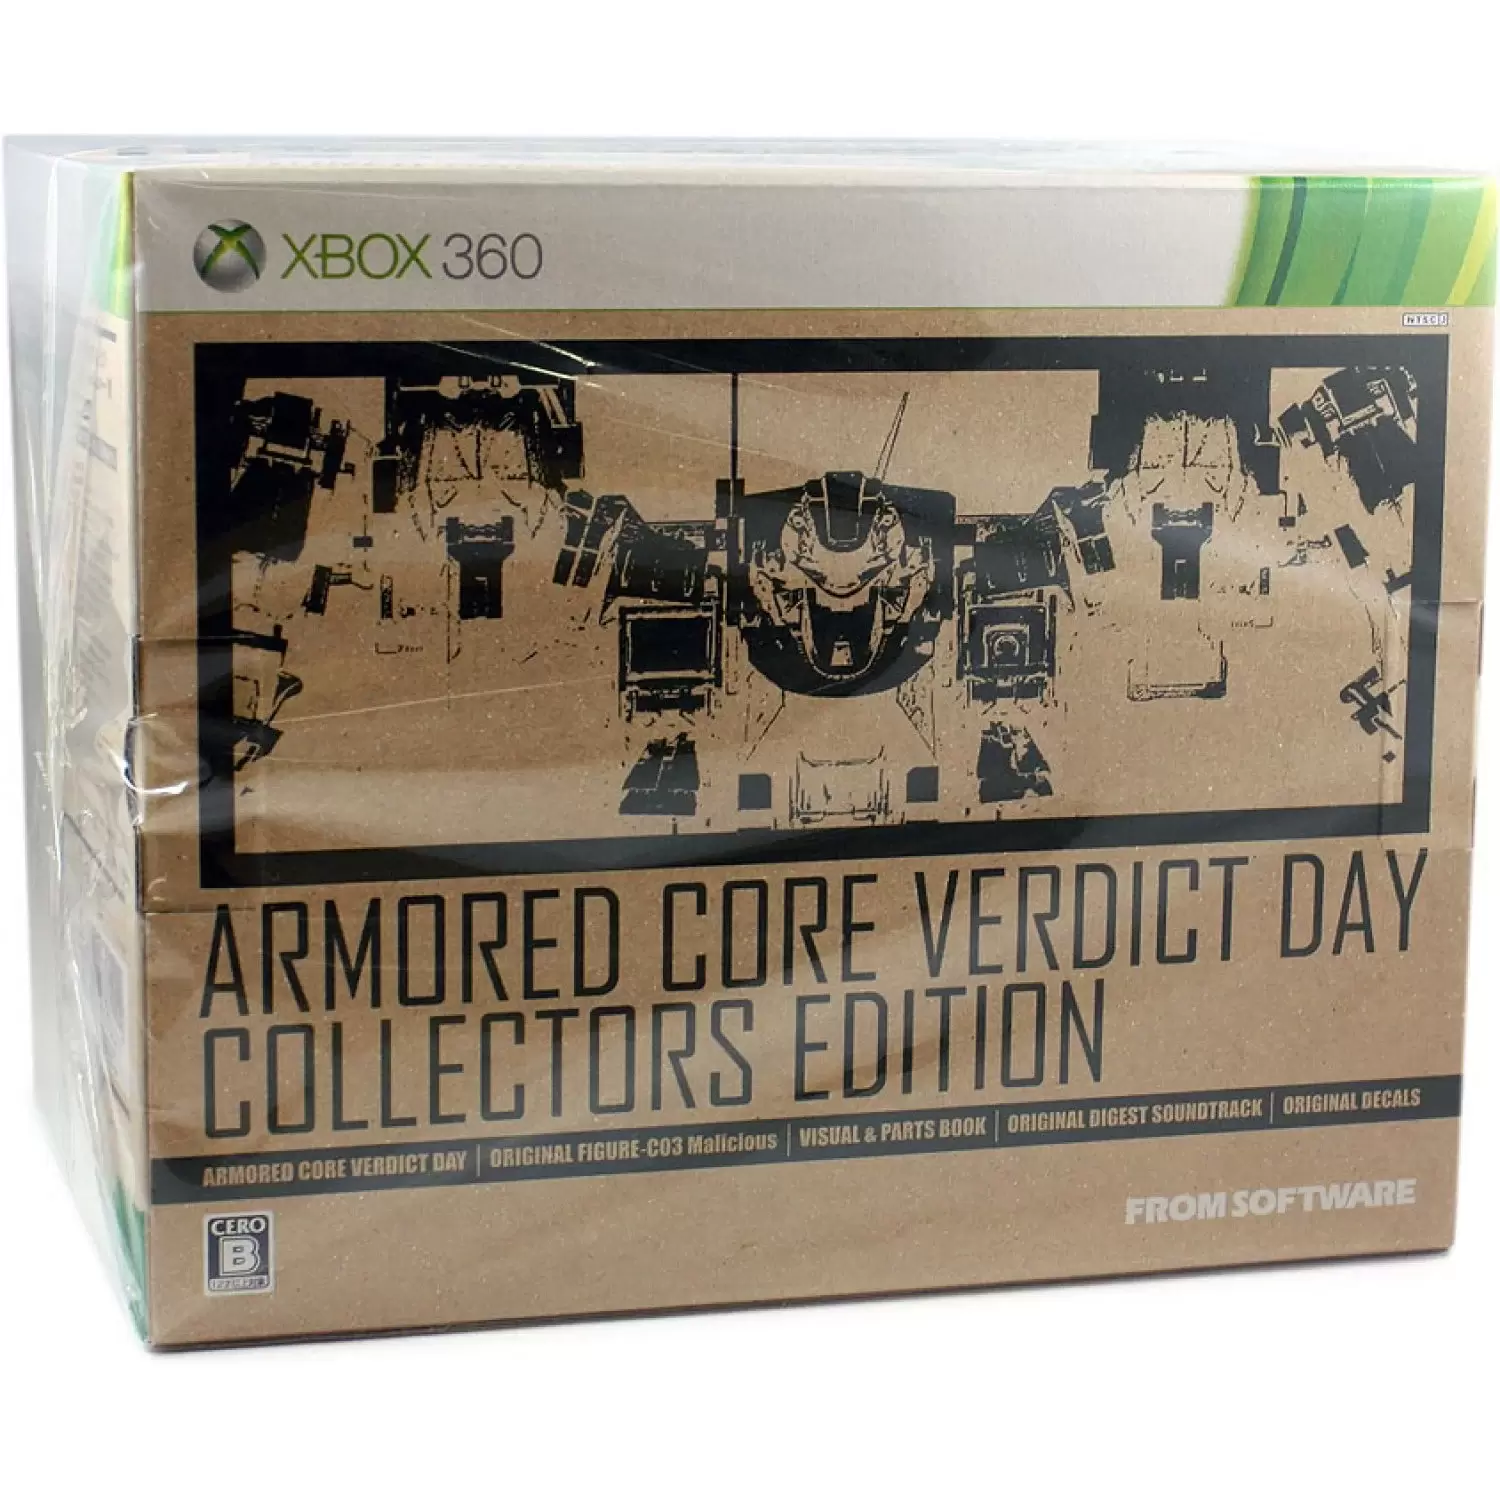 Armored Core: For Answer - Xbox 360, Xbox 360